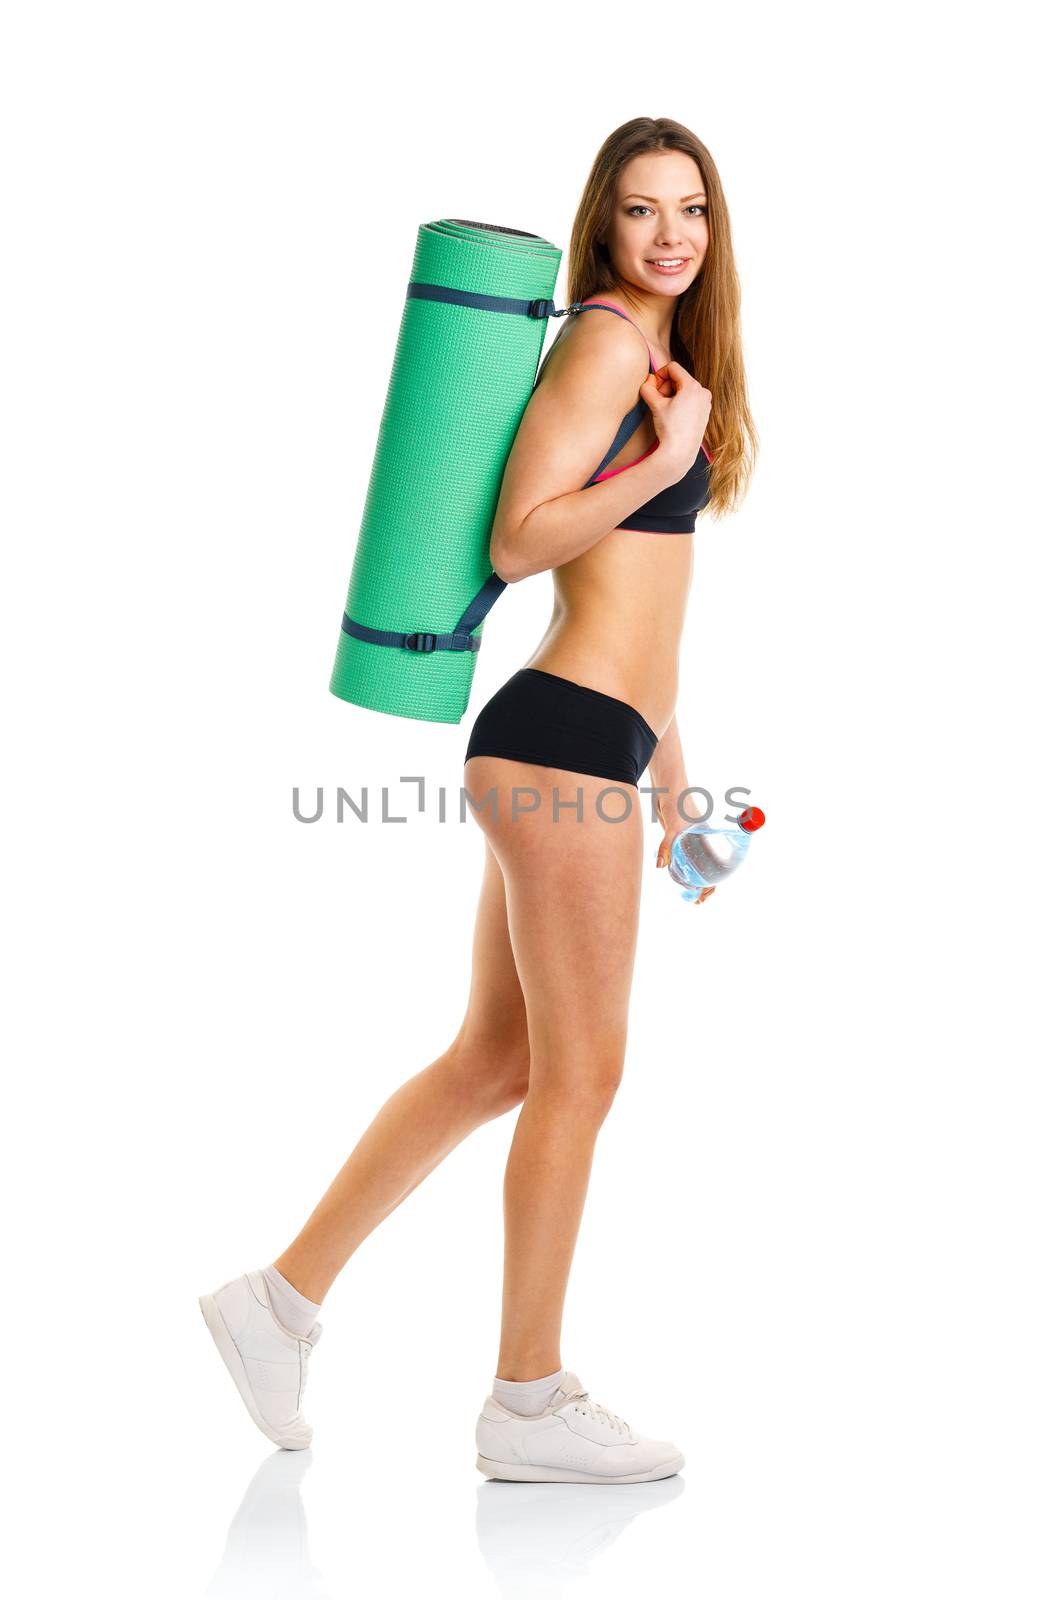 Beautiful athletic woman with mat for fitness and bottle of wate by vlad_star